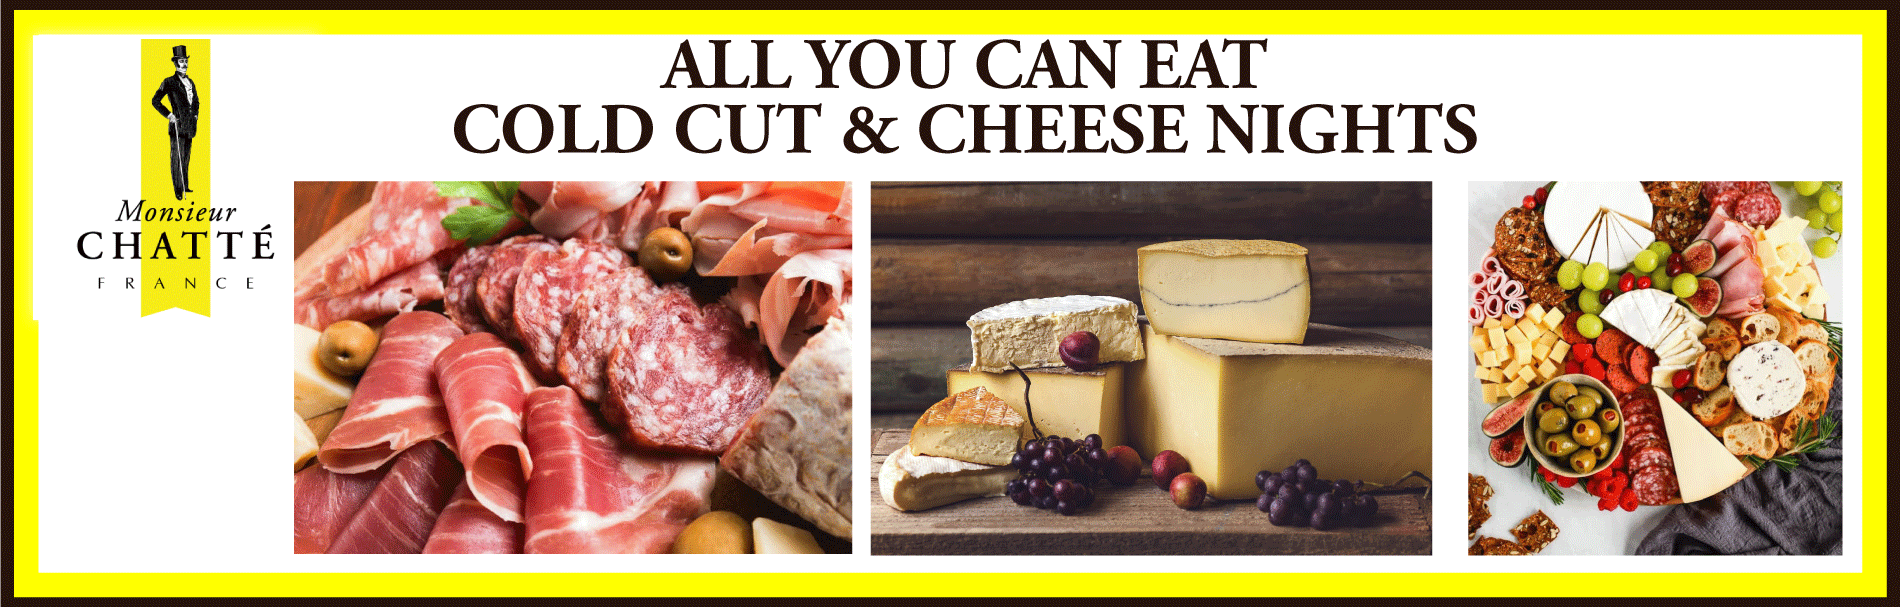 All You Can Eat Cheese and Cold cuts